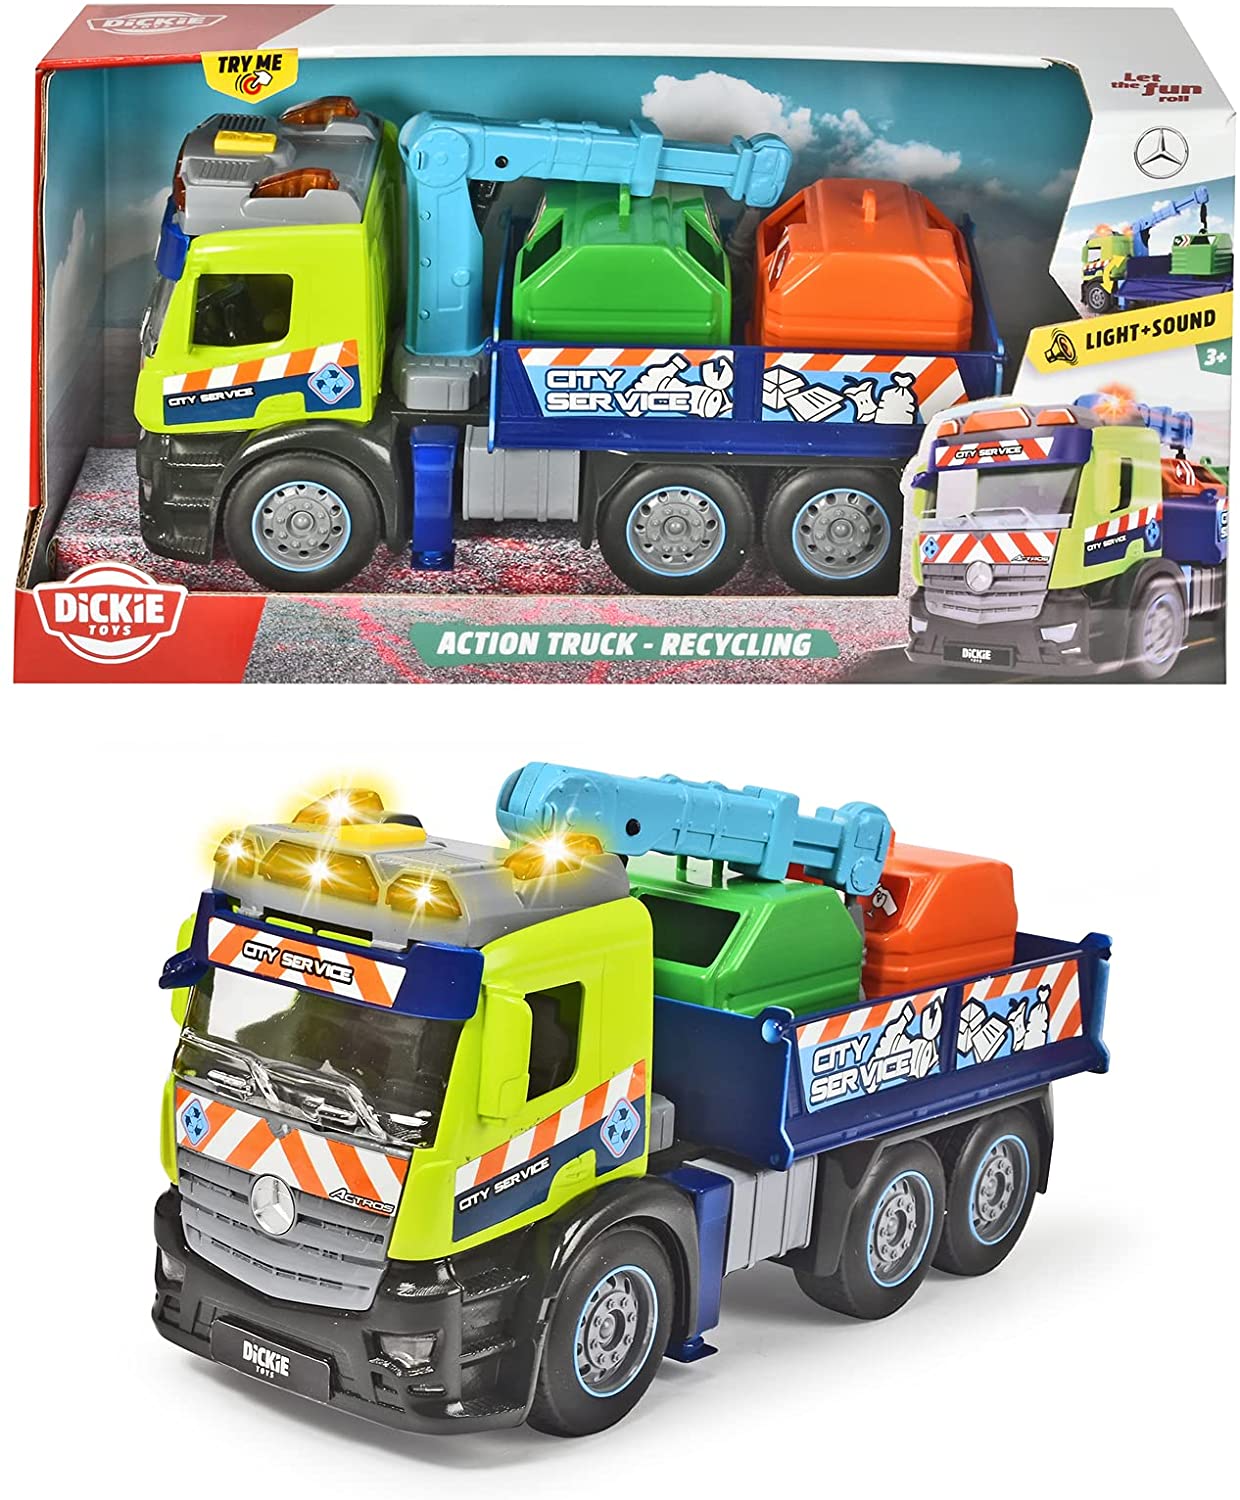 Masina - Truck-Recycling - Green-Blue, 26 cm | Dickie Toys - 1